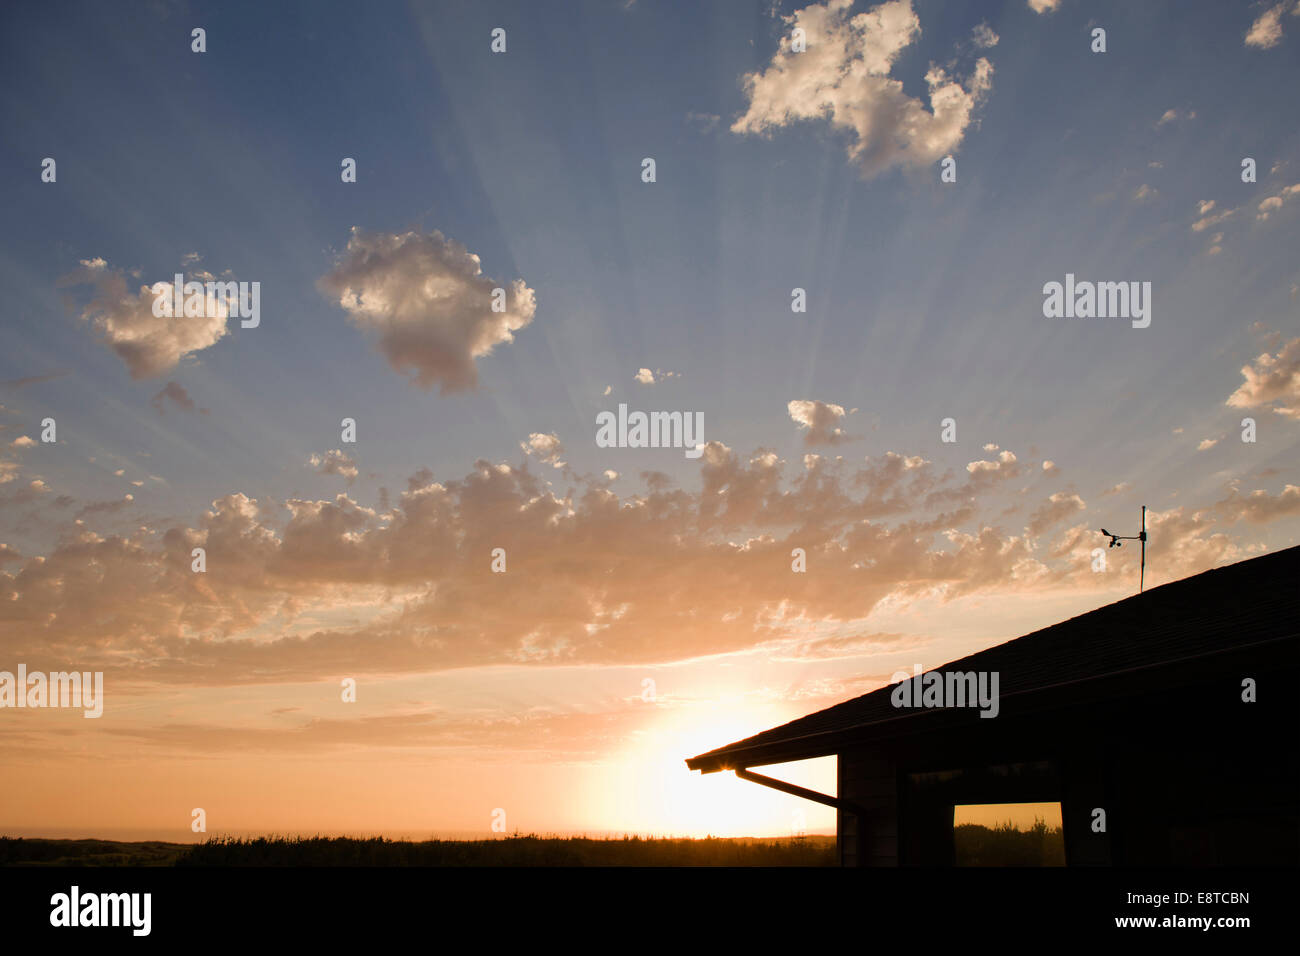 Sunbeams through clouds over house Stock Photo